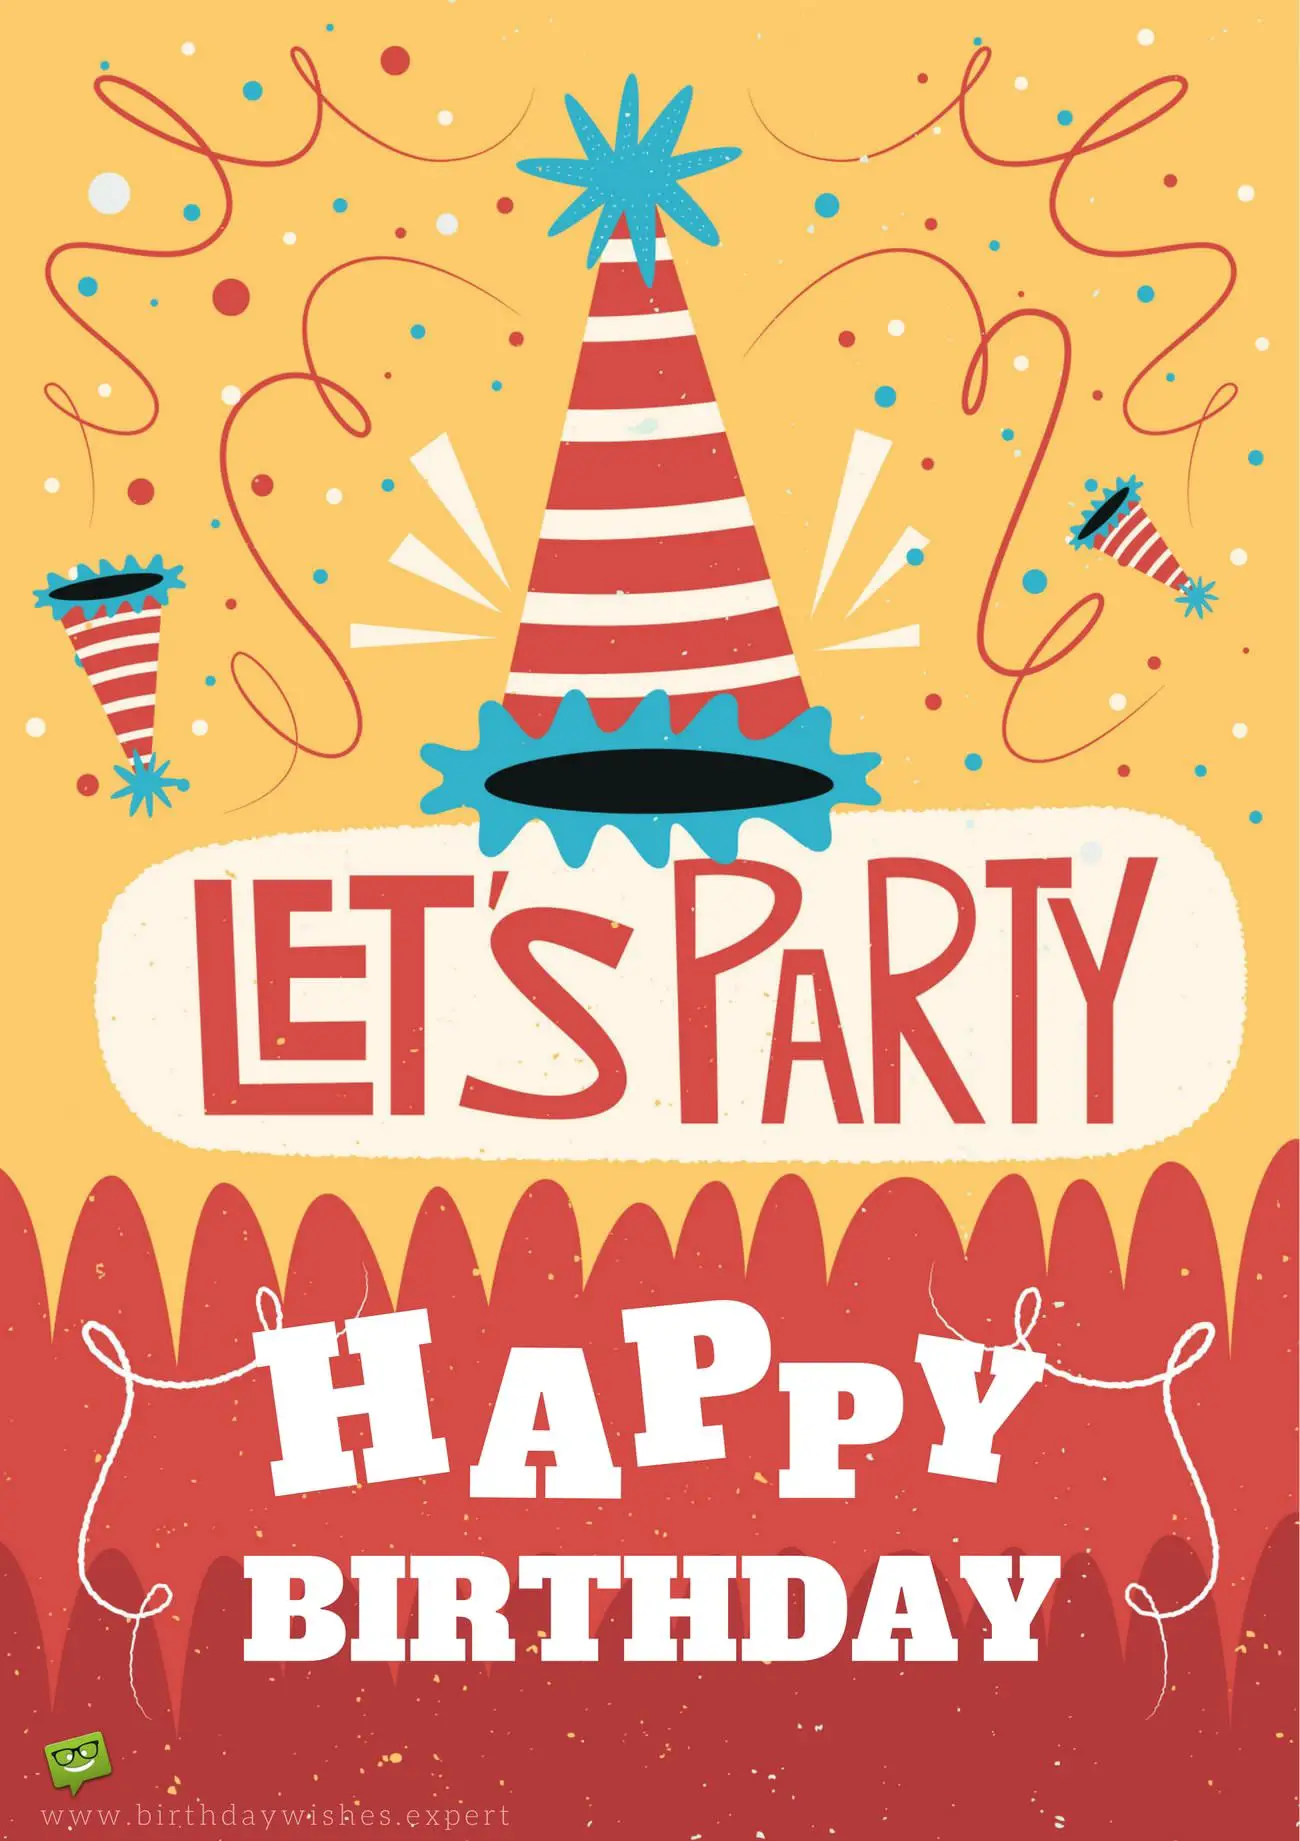 200 Free Birthday eCards for Friends and Family - Part 3